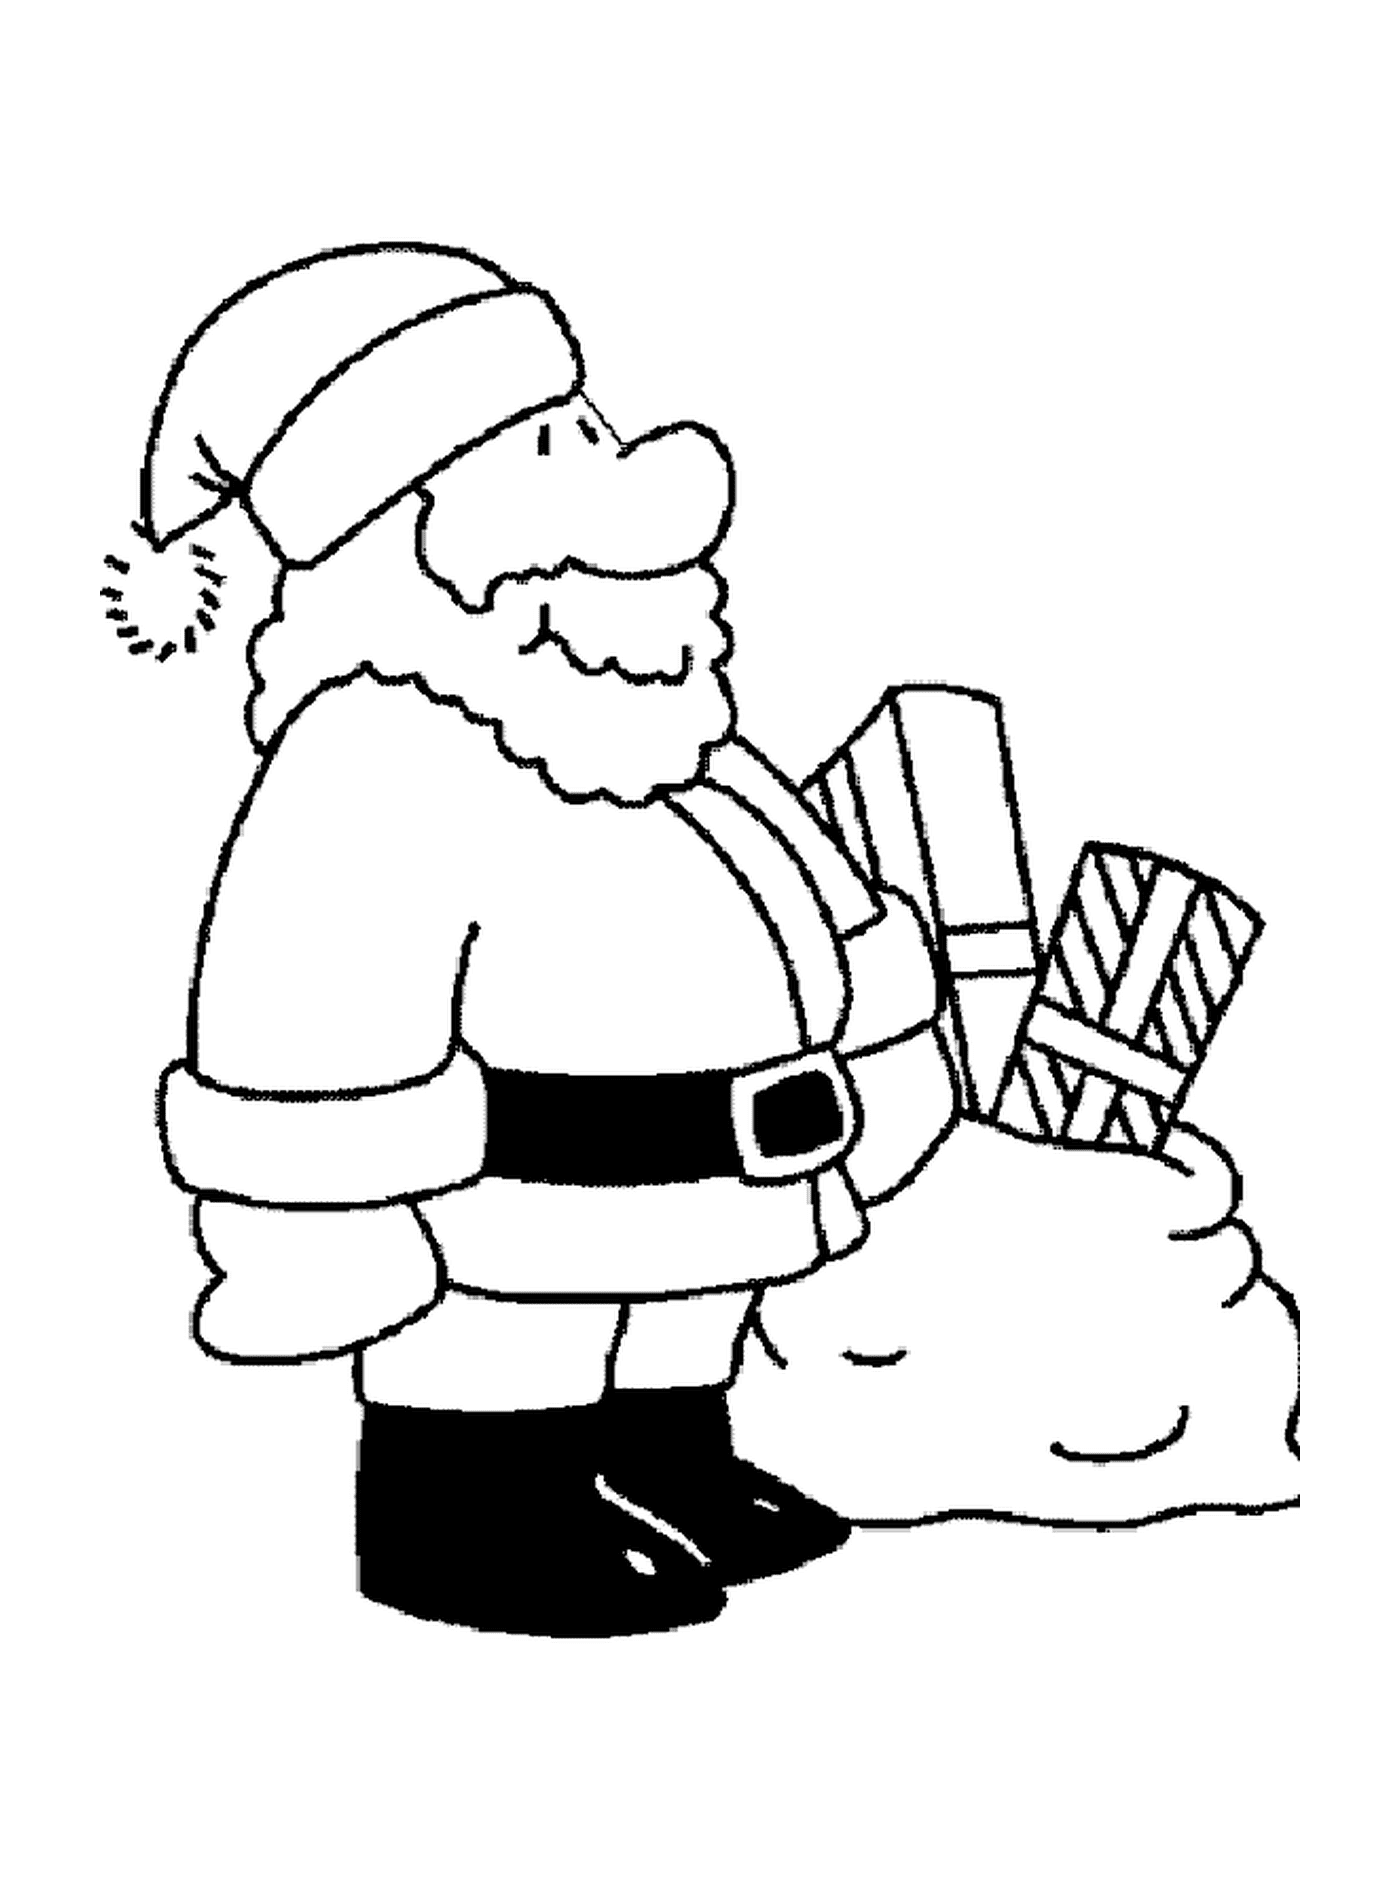  a smiling Santa Claus holding a gift 